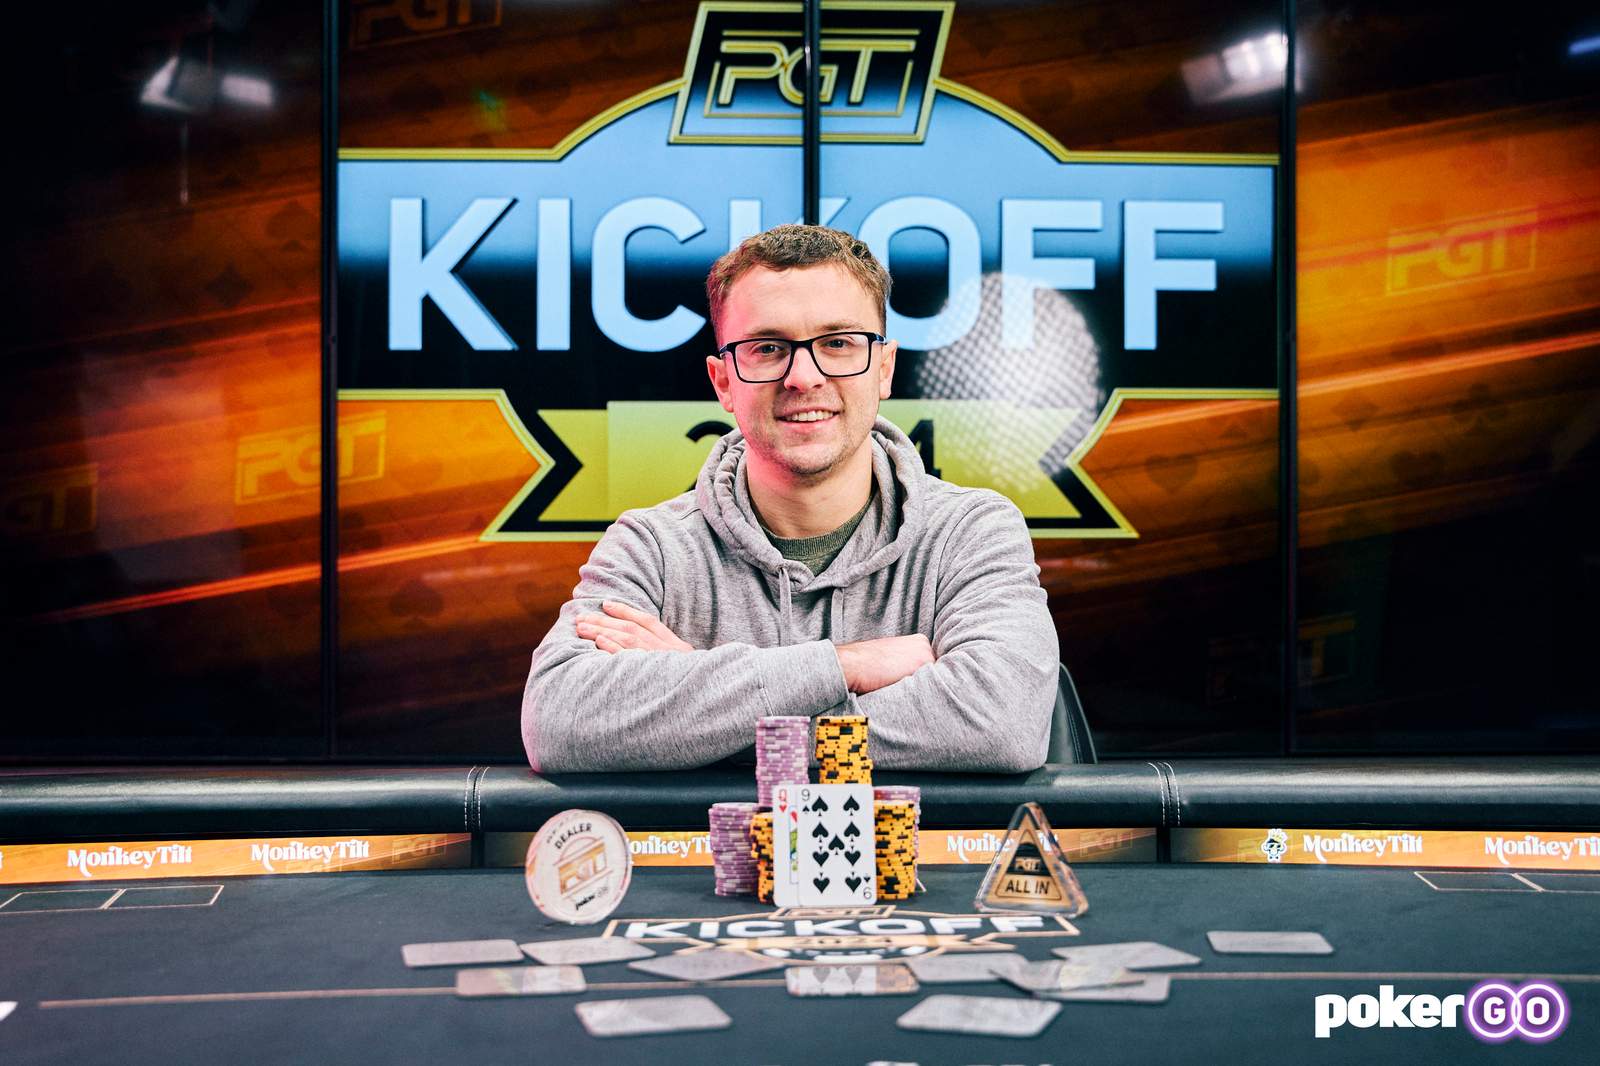 David Coleman Captures First PGT Title and $120,150 in PGT Kickoff $5K